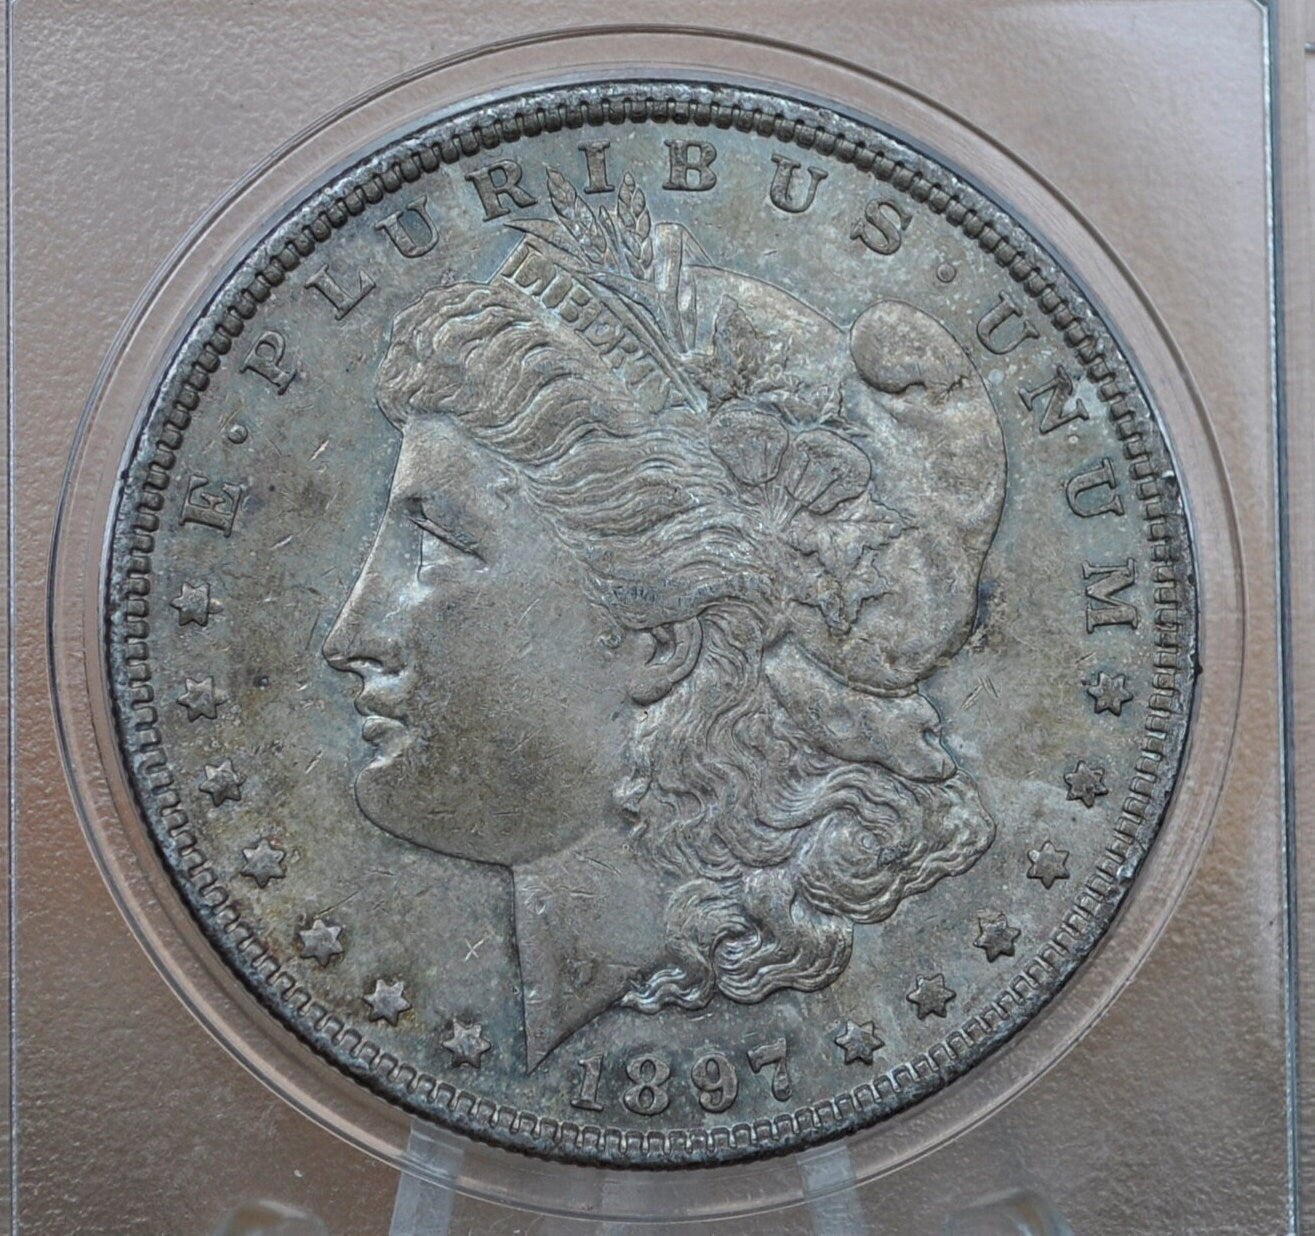 1897 Morgan Silver Dollar - AU (About Uncirculated), Great Detail - 1897 P Morgan Silver - 1897P Silver Dollar AU55; Better Date